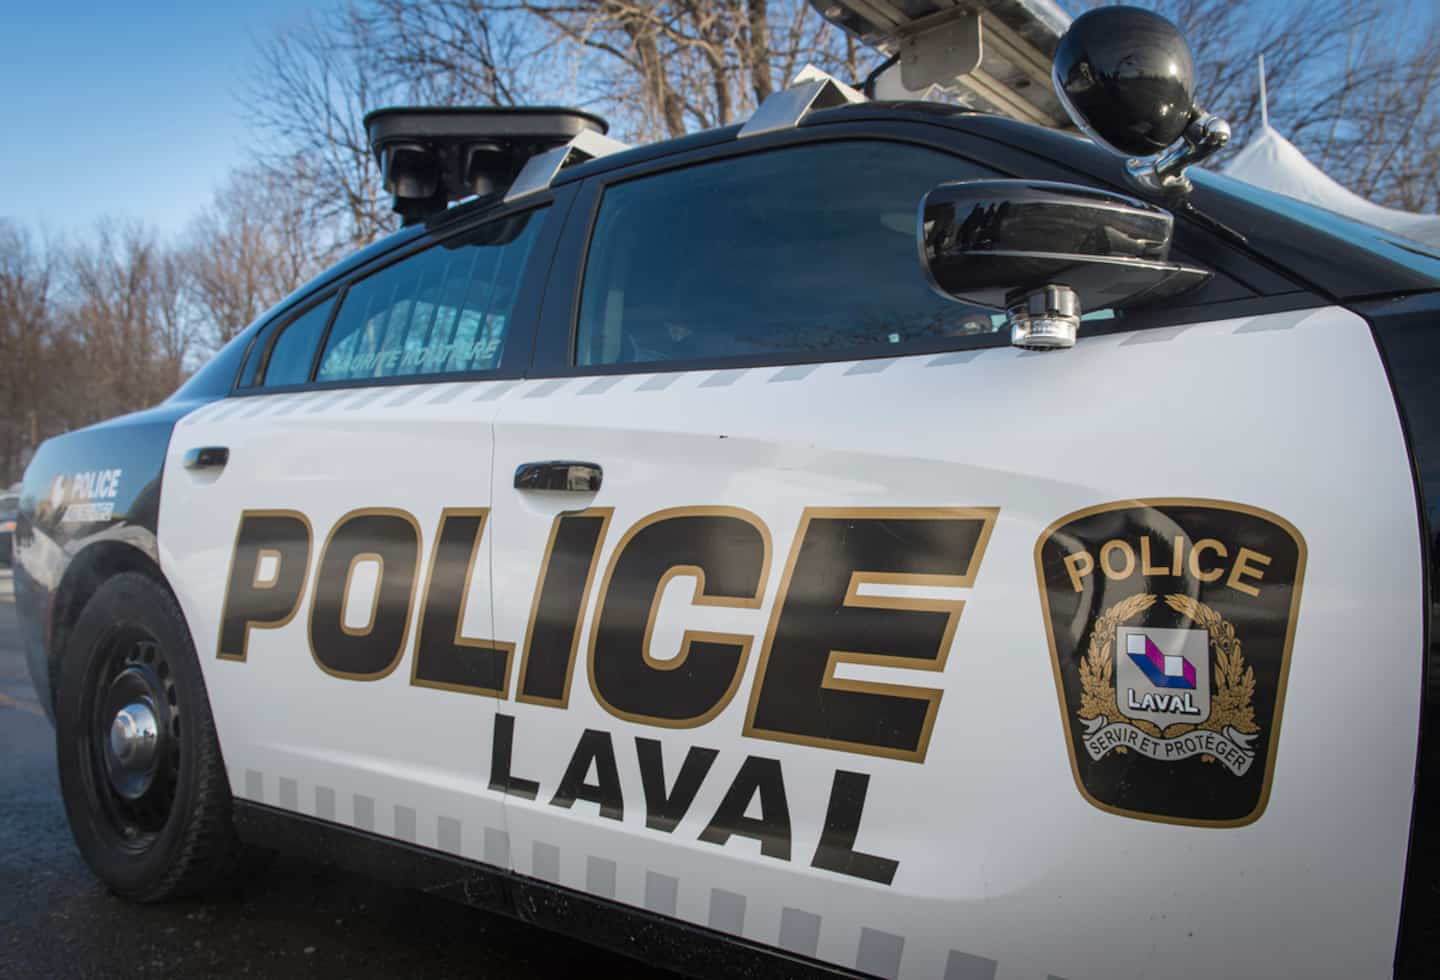 A pedestrian seriously injured in a parking lot in Laval